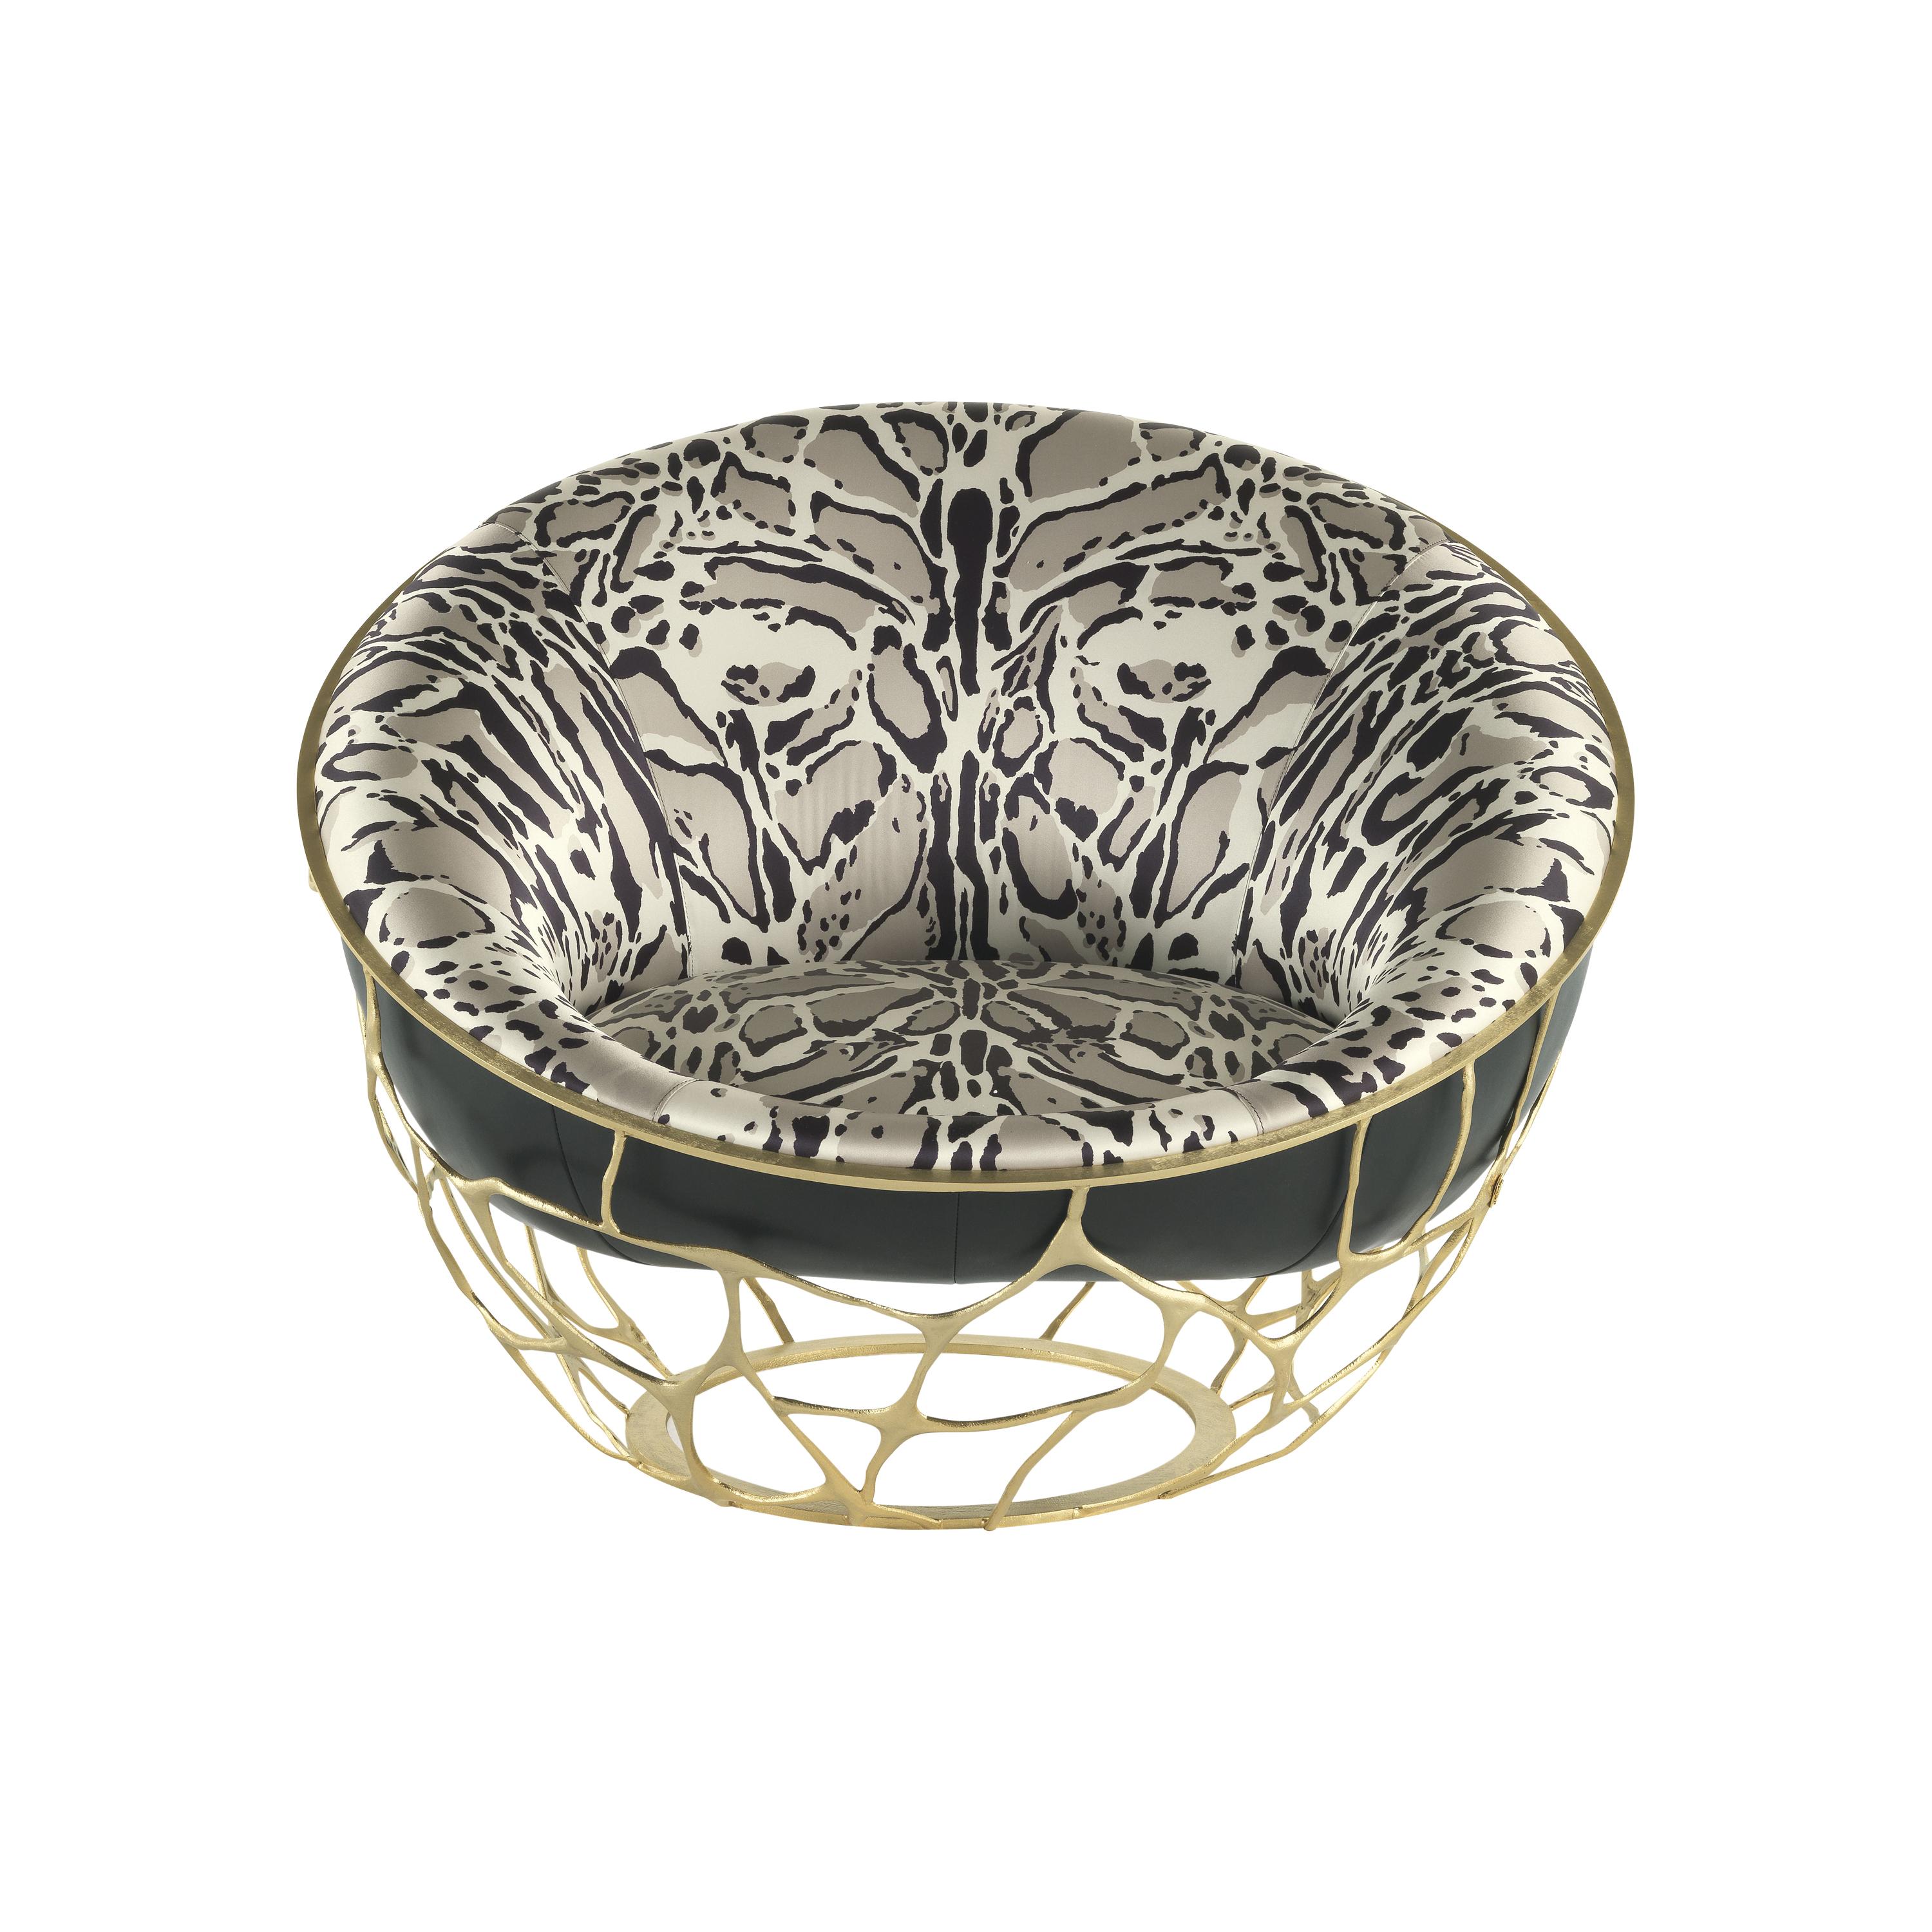 21st Century Sioraf Armchair in Fabric by Roberto Cavalli Home Interiors